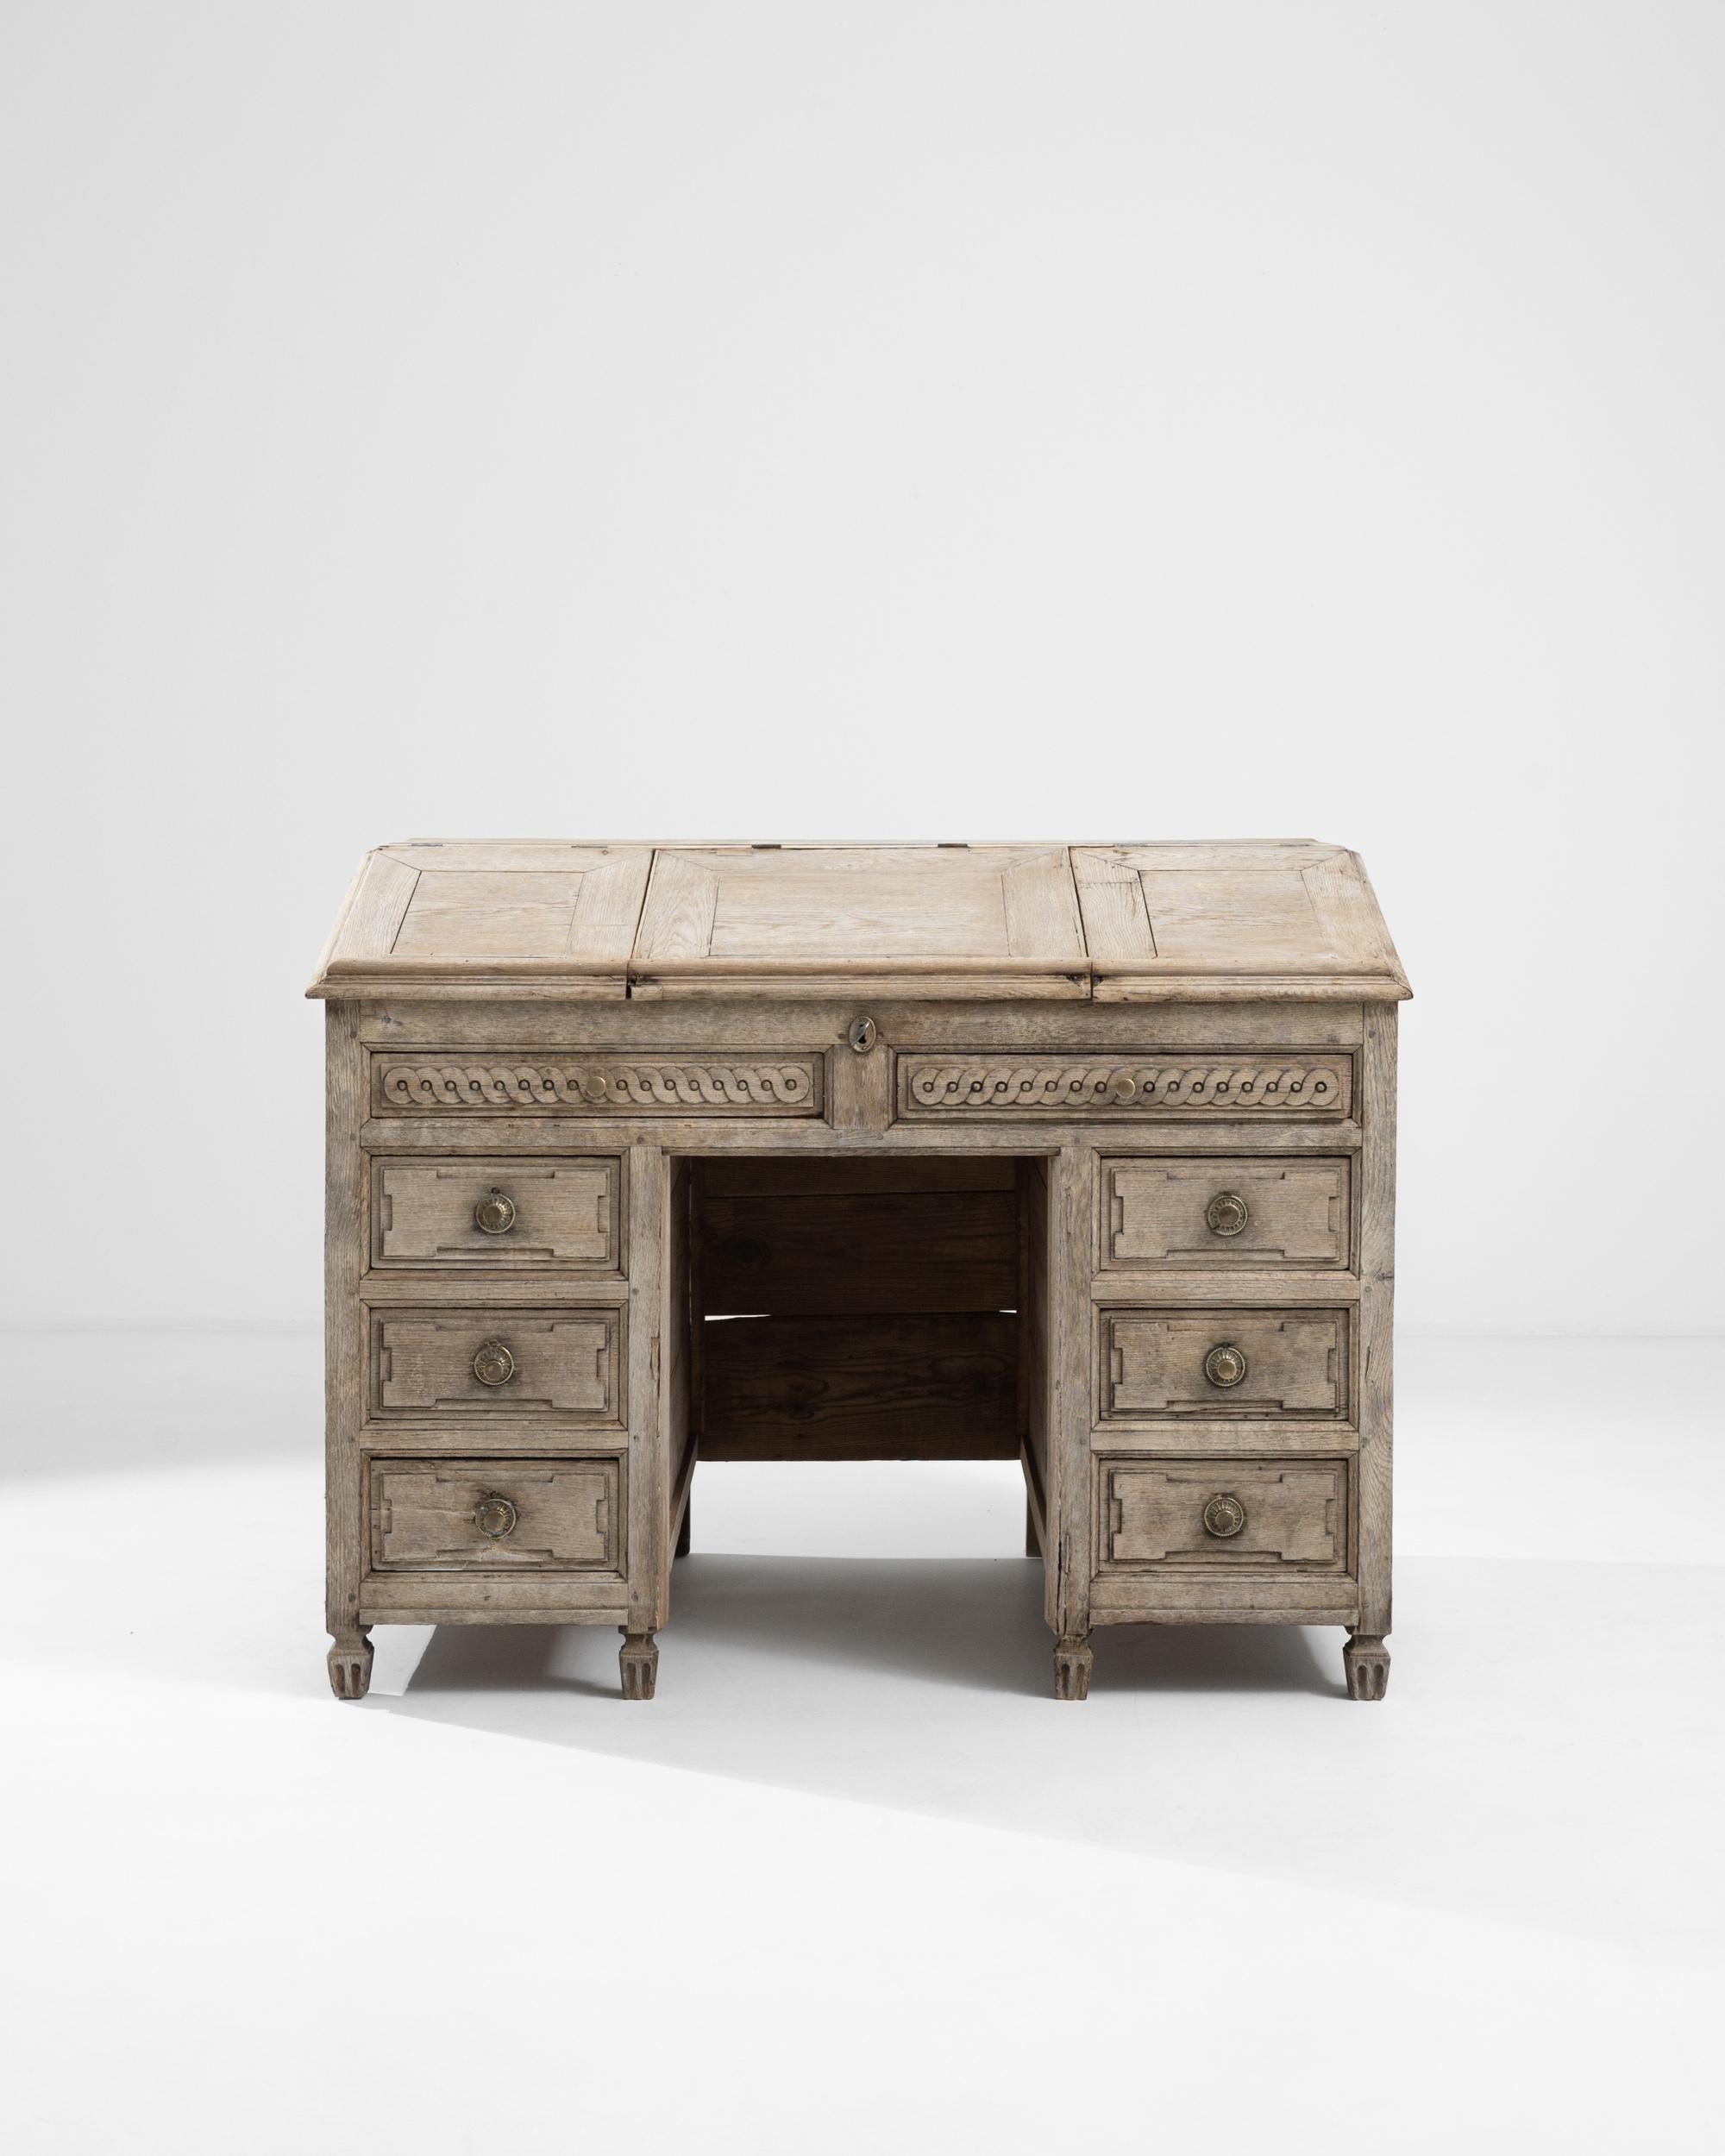 A wooden desk from 19th century France. The lower portion of this exquisitely crafted desk is composed of four symmetrical sliding drawers, in addition to a removable top that reveals additional ample storage space and four more hidden drawers. The